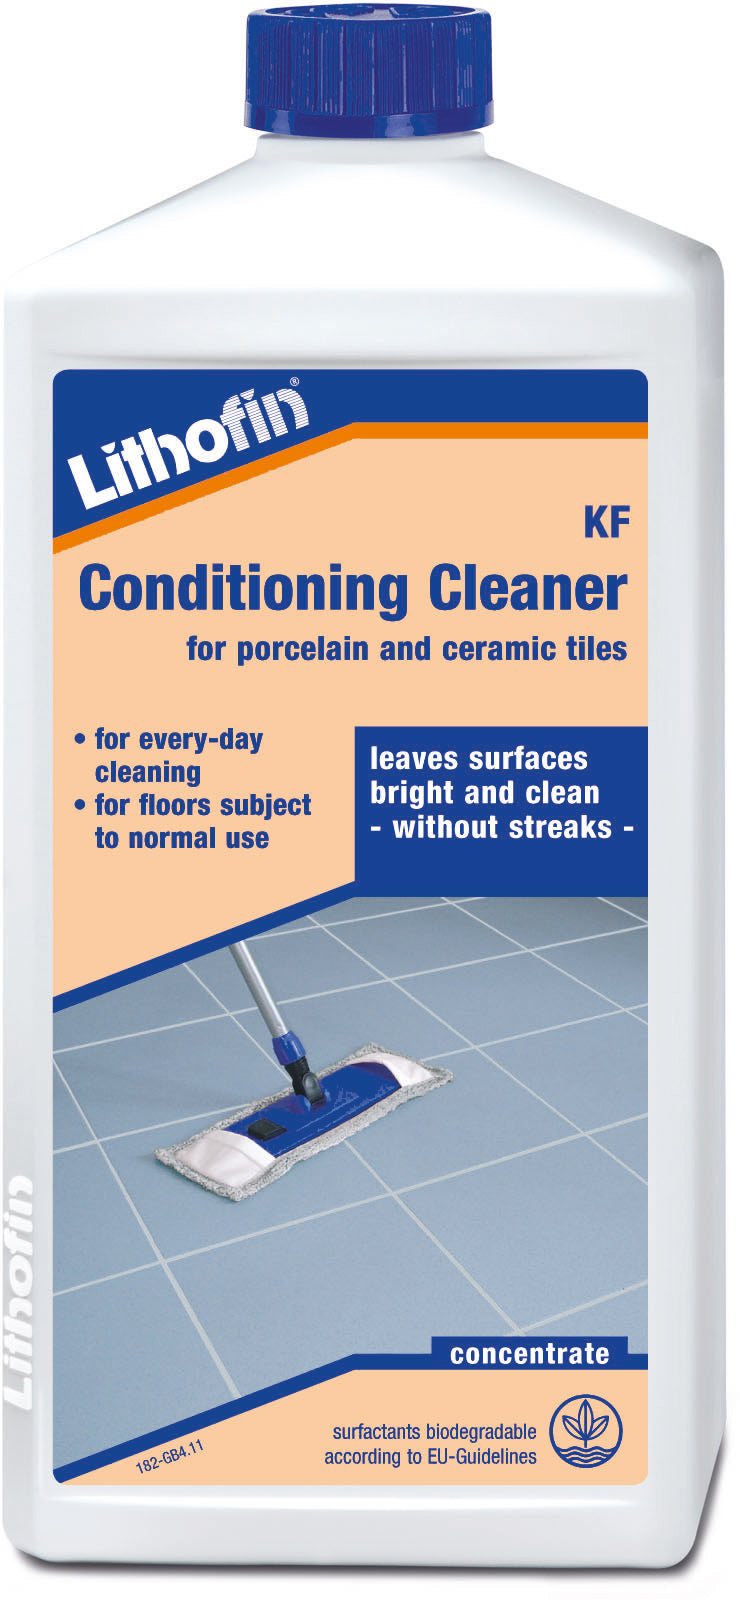 Lithofin Conditioning Cleaner for porcelain and ceramic tiles 